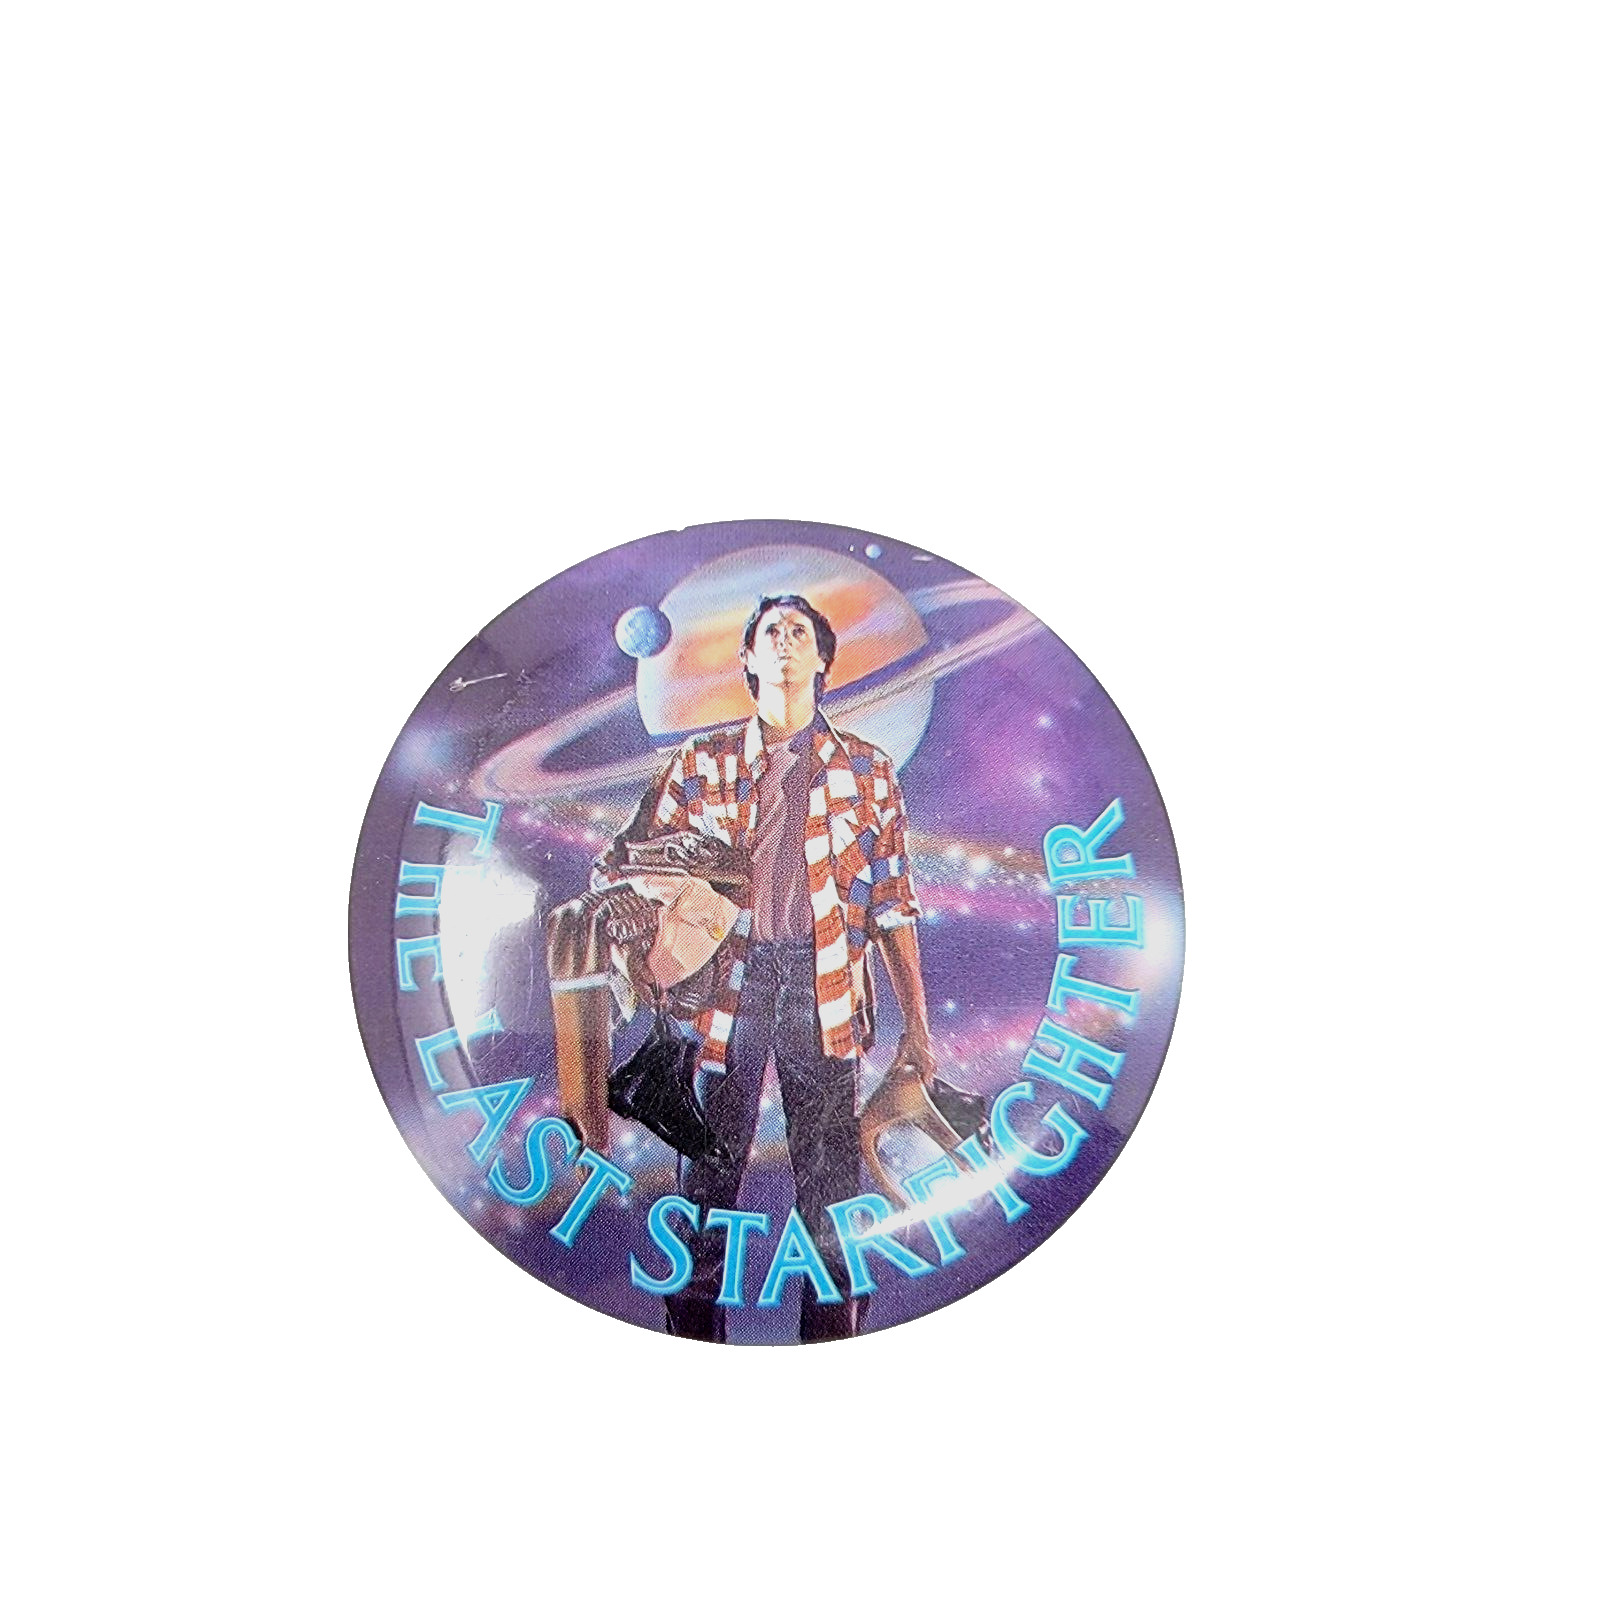 The Last Starfighter Vintage 1980's Sci Fi Promo Collectible Pinback Button 